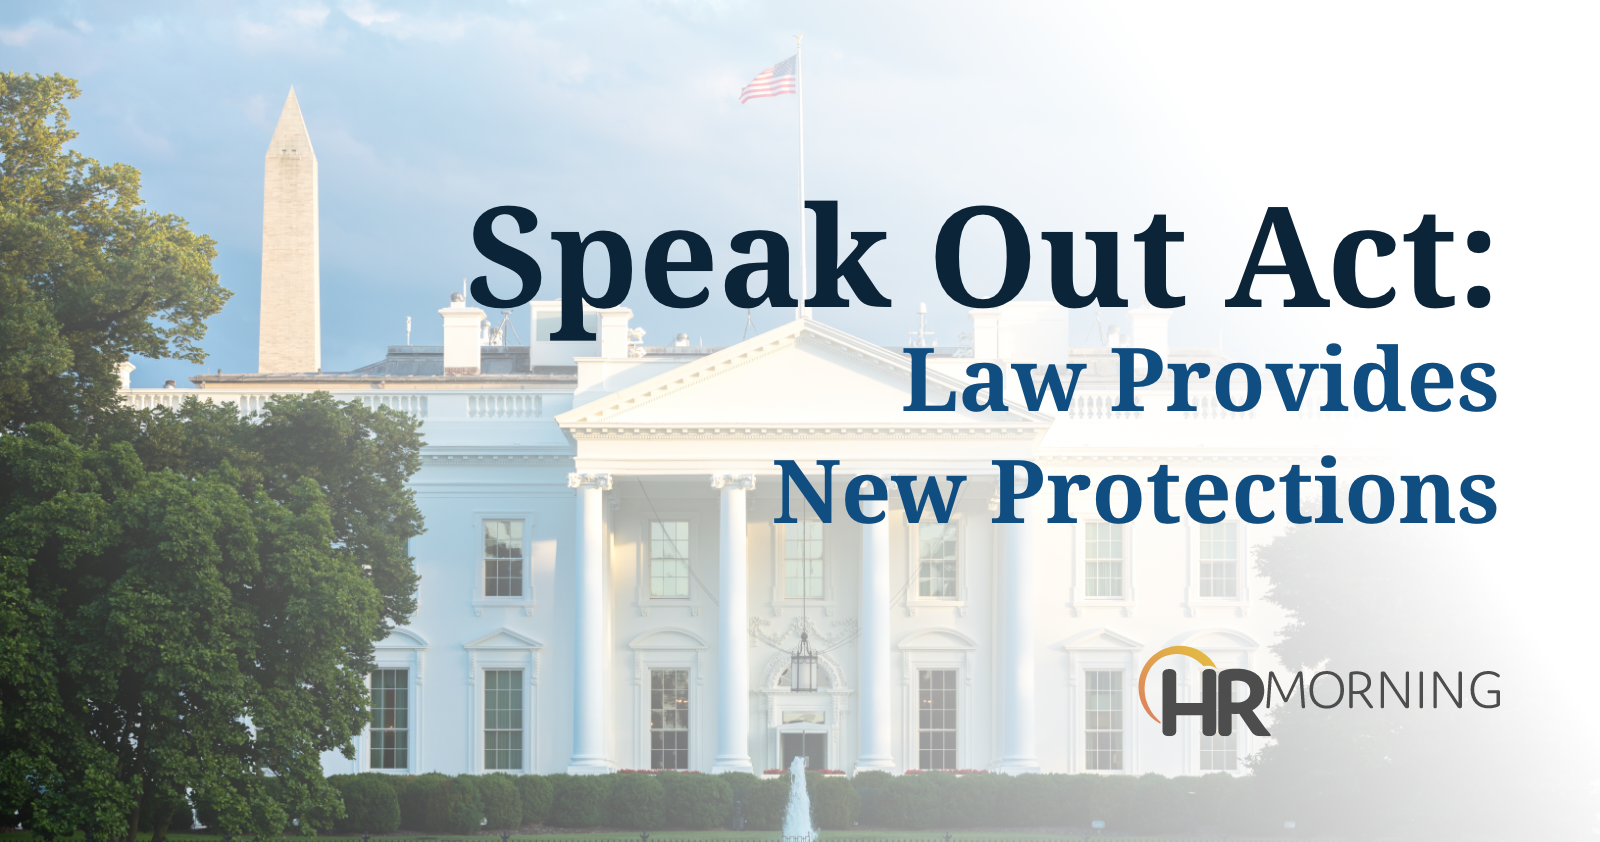 Speak Out Act: Law Provides New Protections